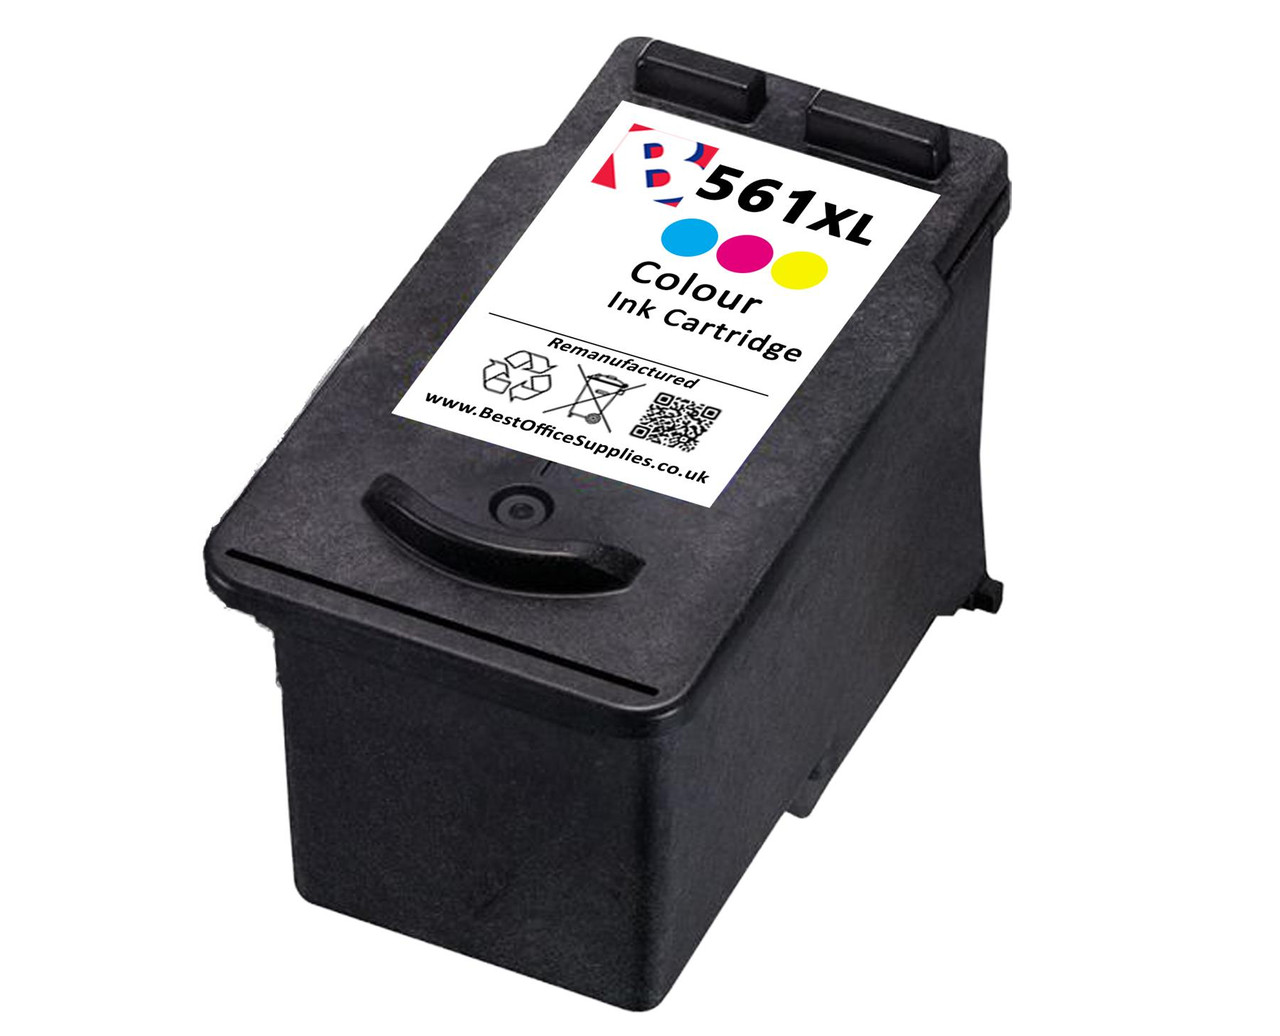 ATOPINK 560 561 Ink Cartridges 560 561 XL Replacement for Canon 560 561  PG-560XL Black and CL-561XL Colour for Canon Pixma TS5350 TS7450 TS5352  TS7451 TS5353 TS531 : : Electronics